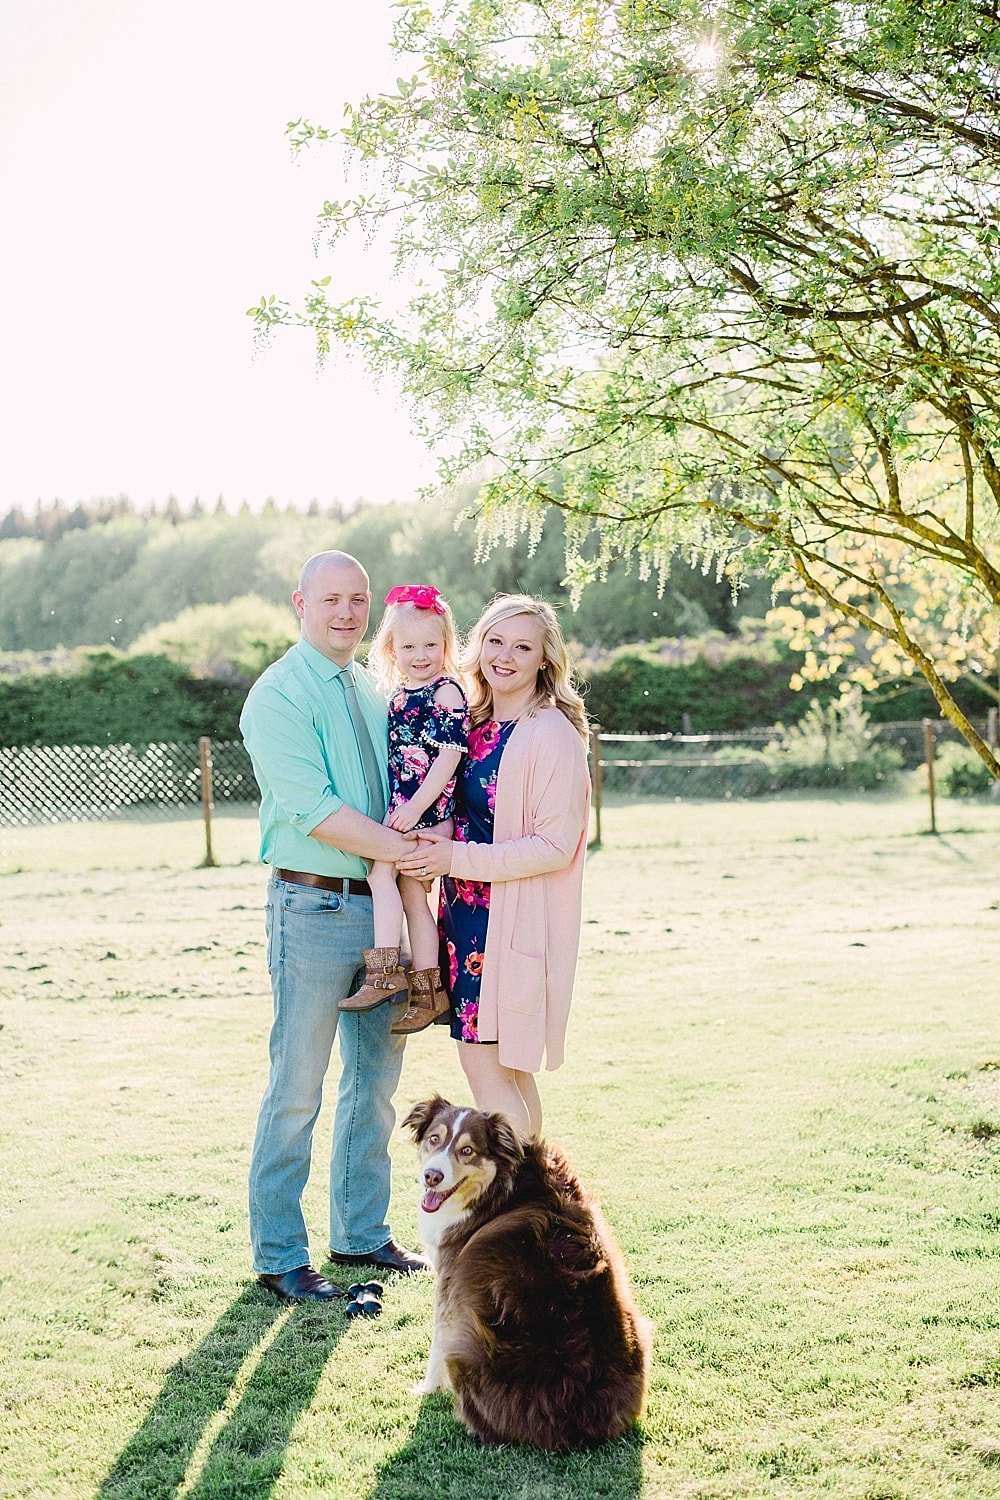 Houston family photography session photographed by Alicia Yarrish Photography